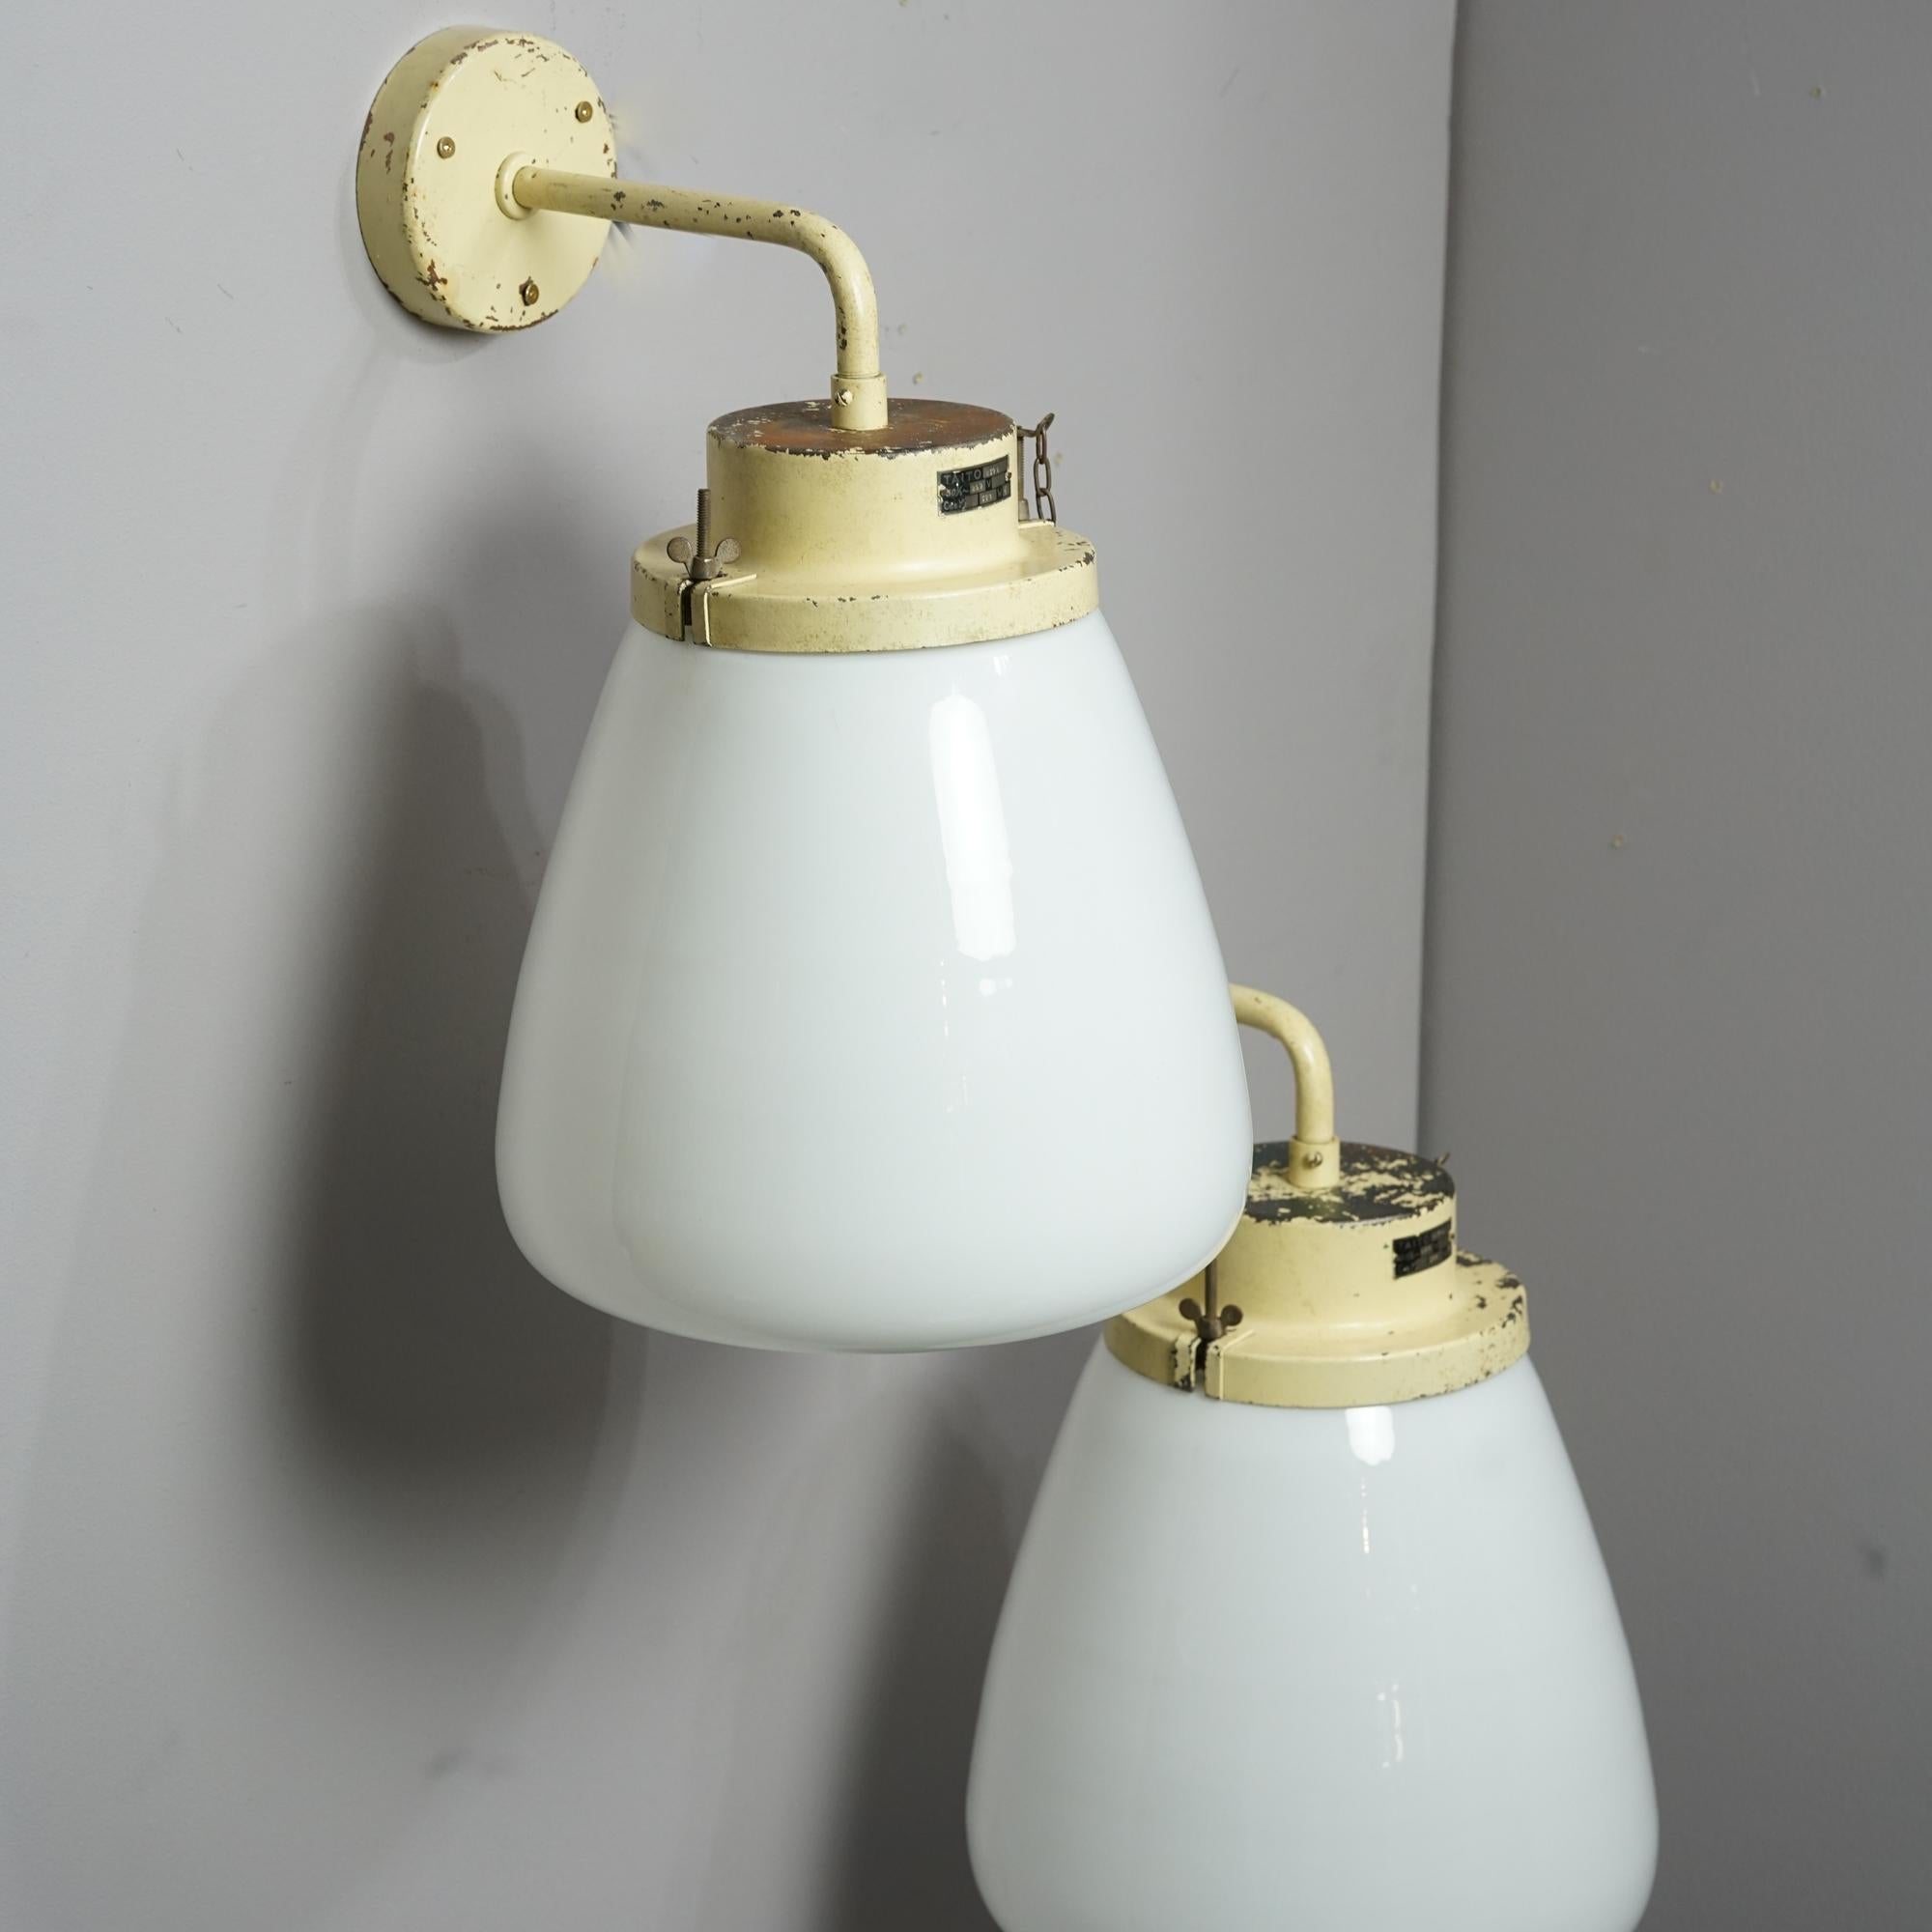 Pair of large wall lights by Paavo Tynell for Taito Oy from the 1940s. Painted metal frame with milk glass domes. Manufacturers stamp. Good vintage condition, patina and wear consistent with age and use on the metal parts. The lights are sold as a